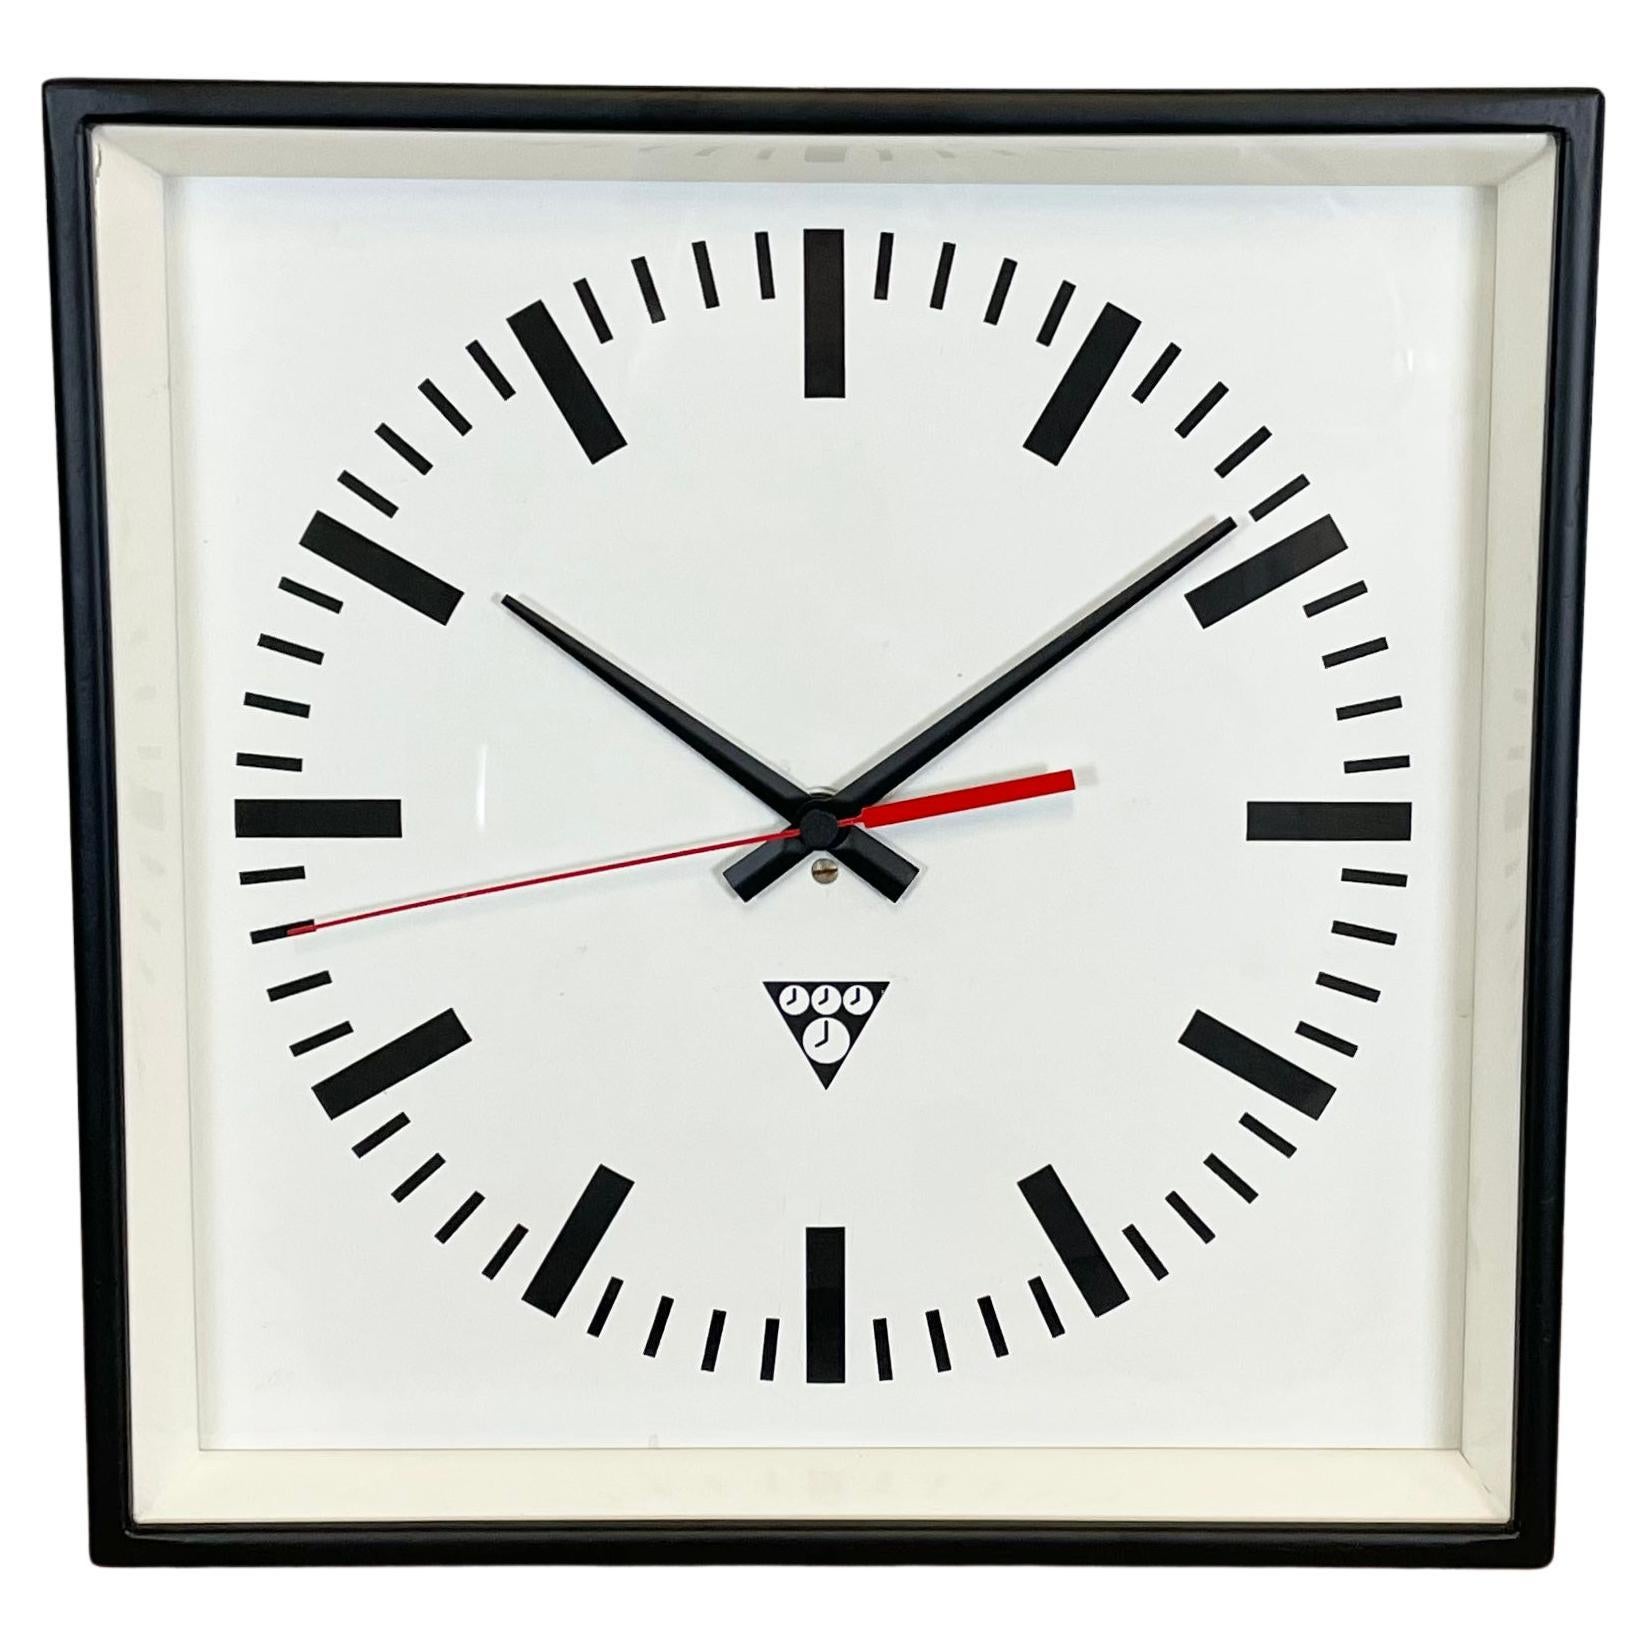 Black Industrial Square Wall Clock from Pragotron, 1970s